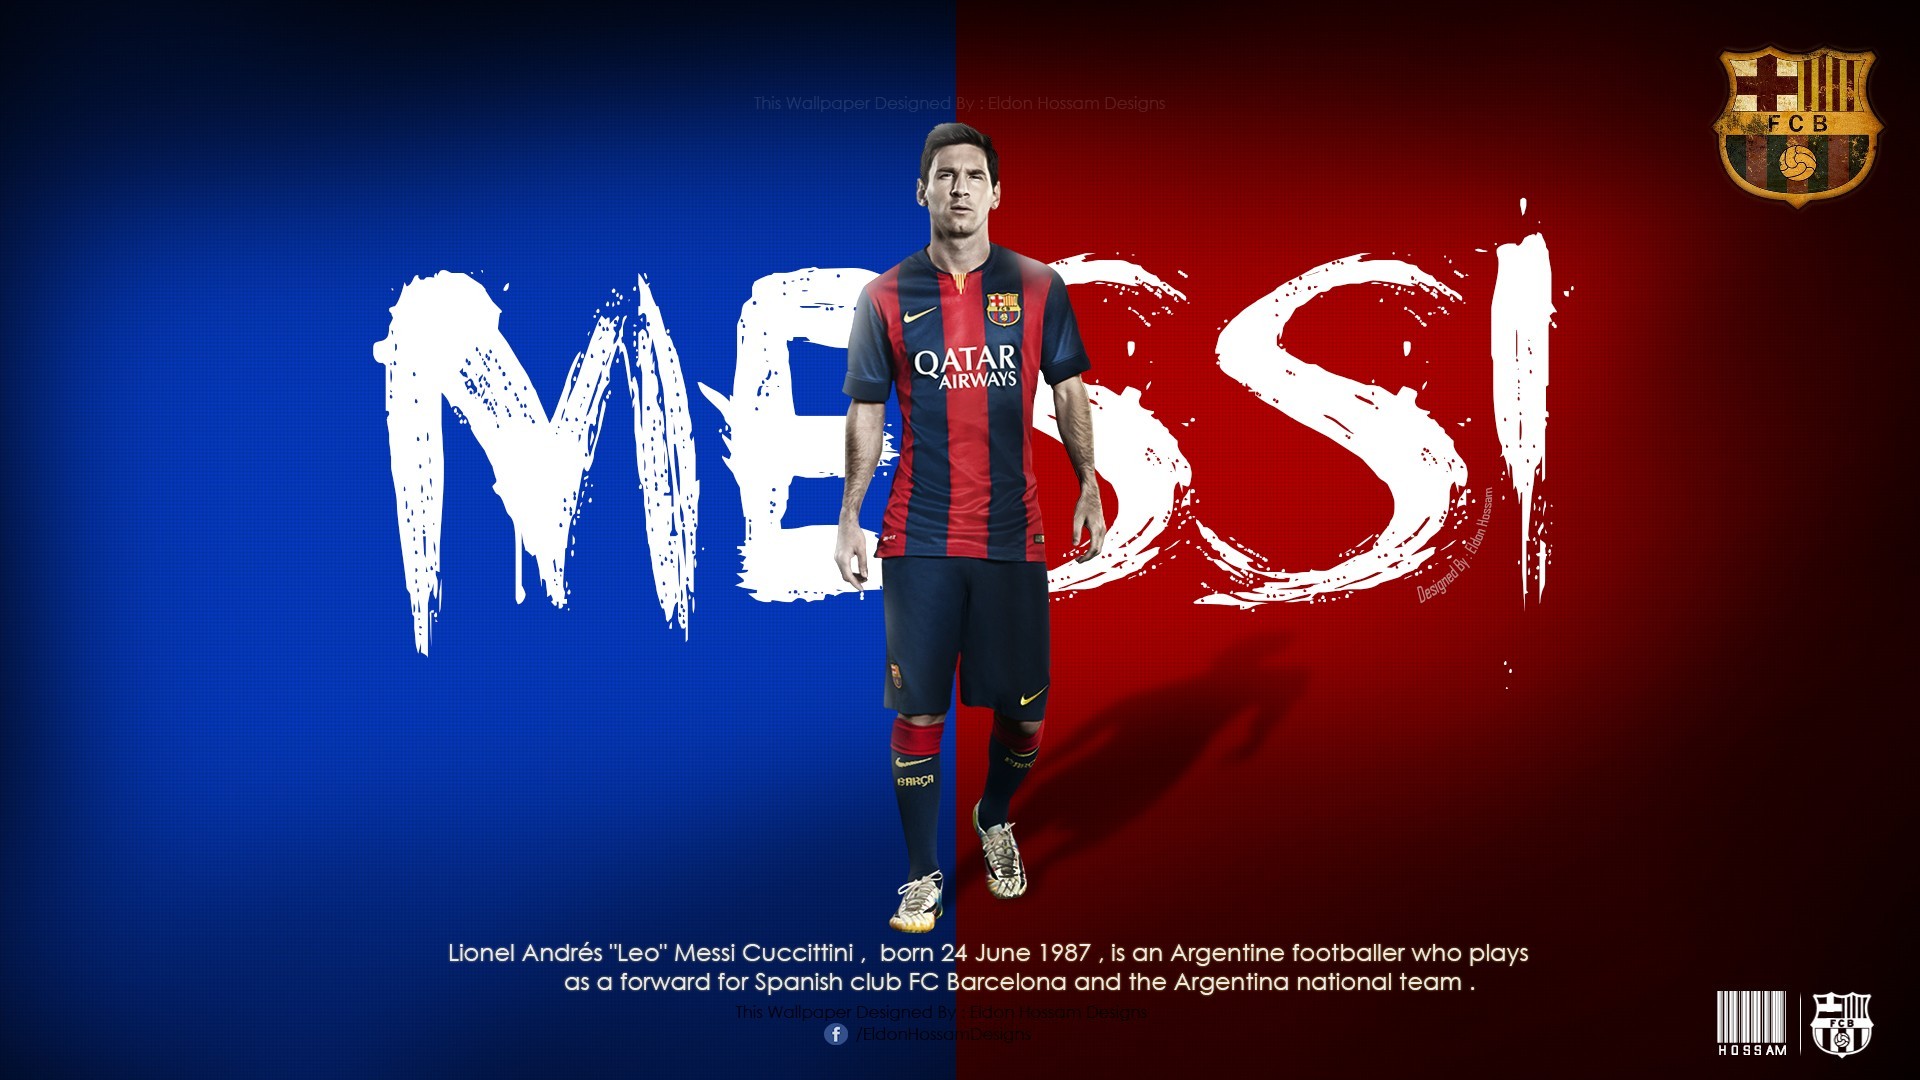 HD Lionel Messi Barcelona Wallpapers with resolution 1920x1080 pixel. You can make this wallpaper for your Mac or Windows Desktop Background, iPhone, Android or Tablet and another Smartphone device